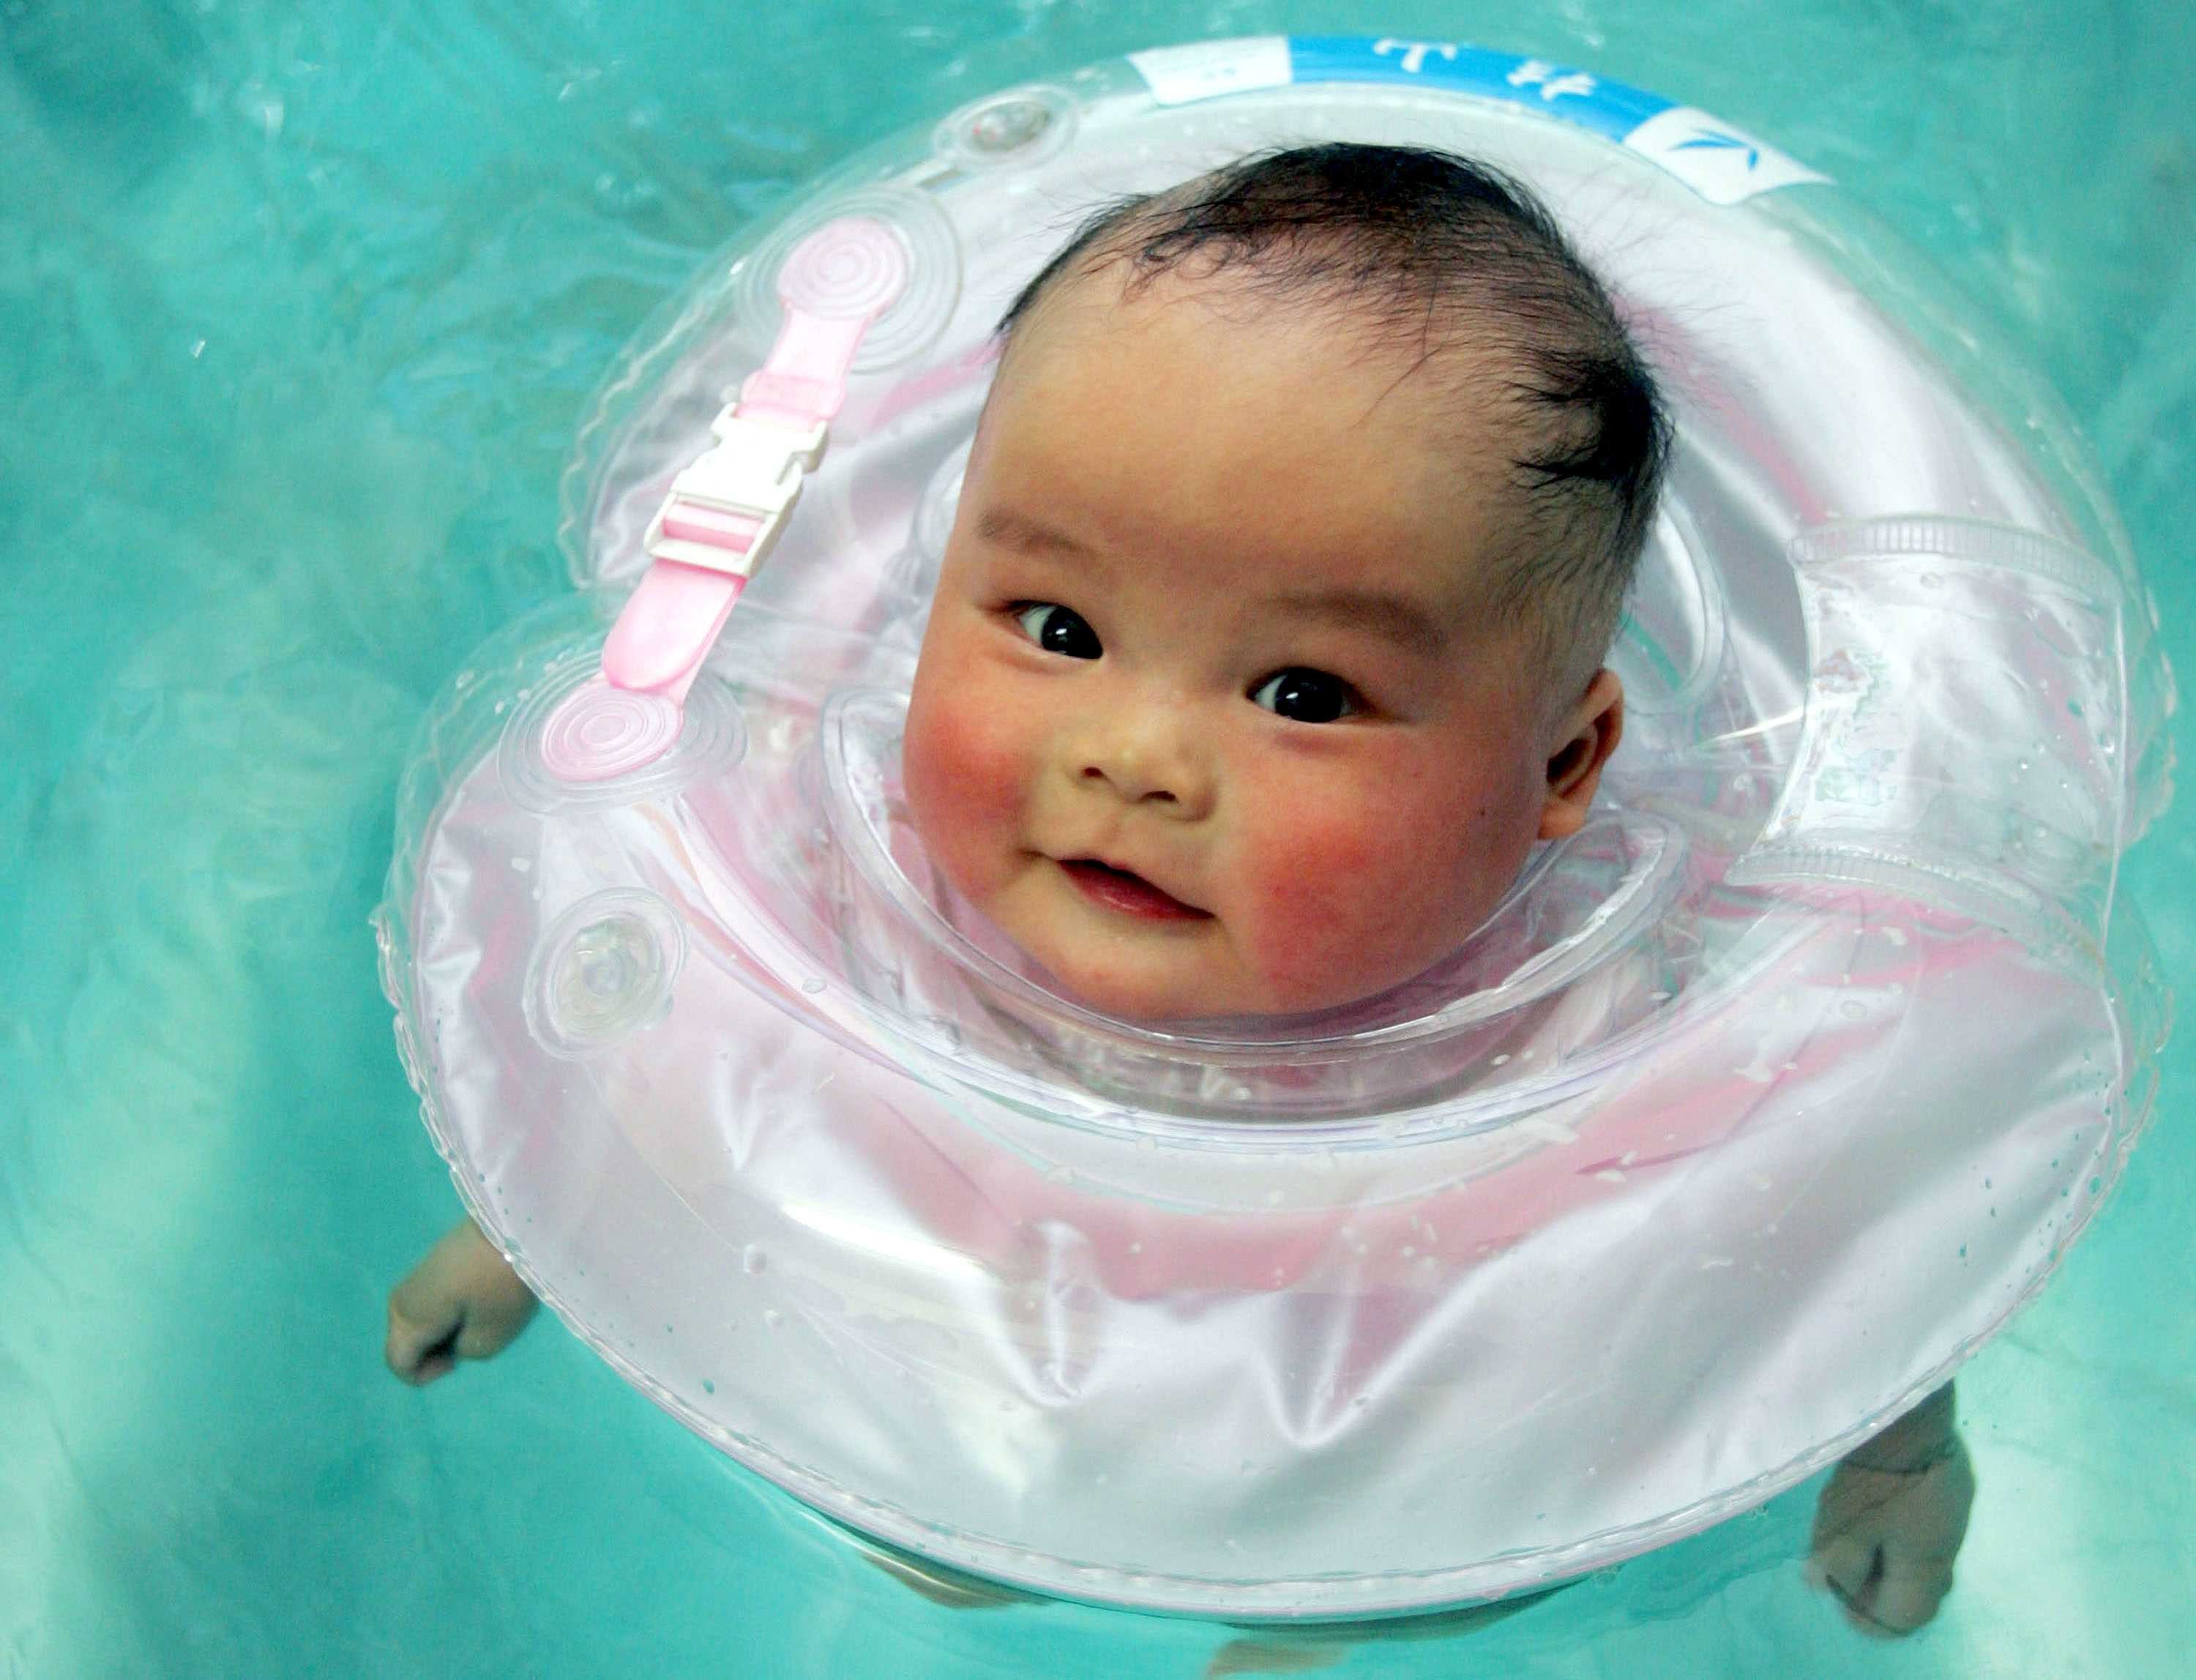 UPDATED: Those popular baby neck floats are 'potential death traps'